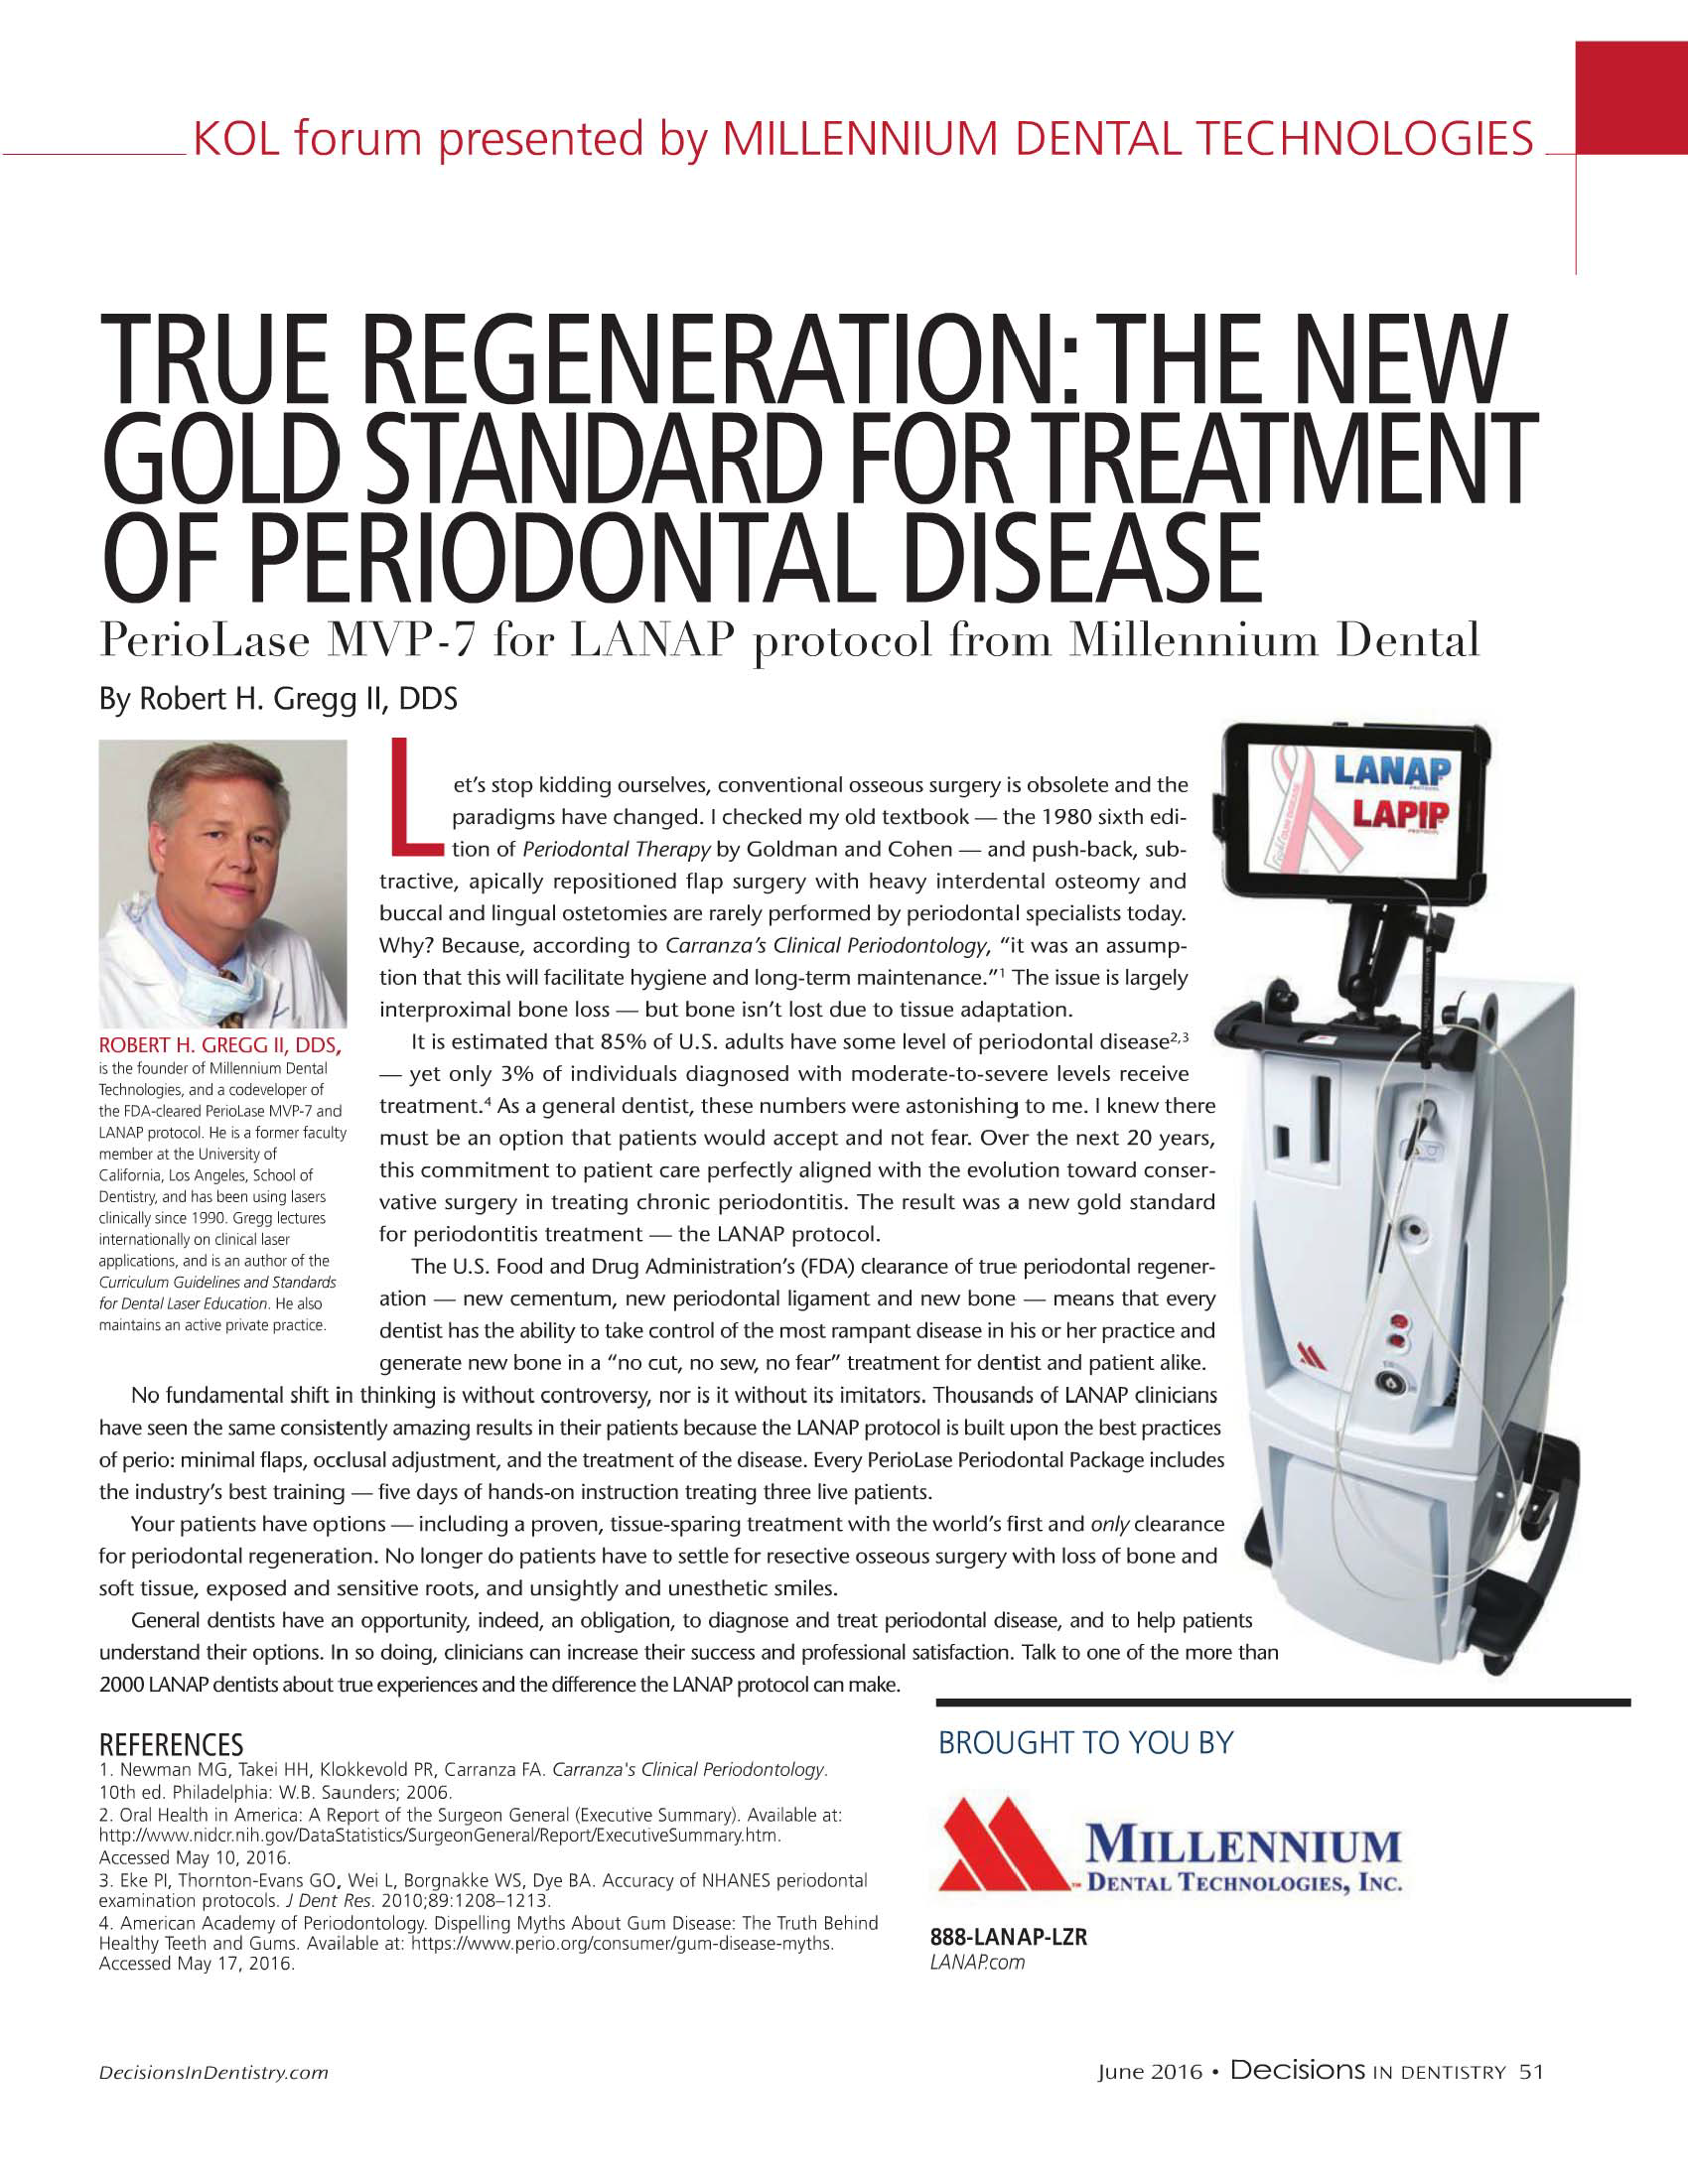 True Regeneration: The new gold standard for treatment of periodontal disease